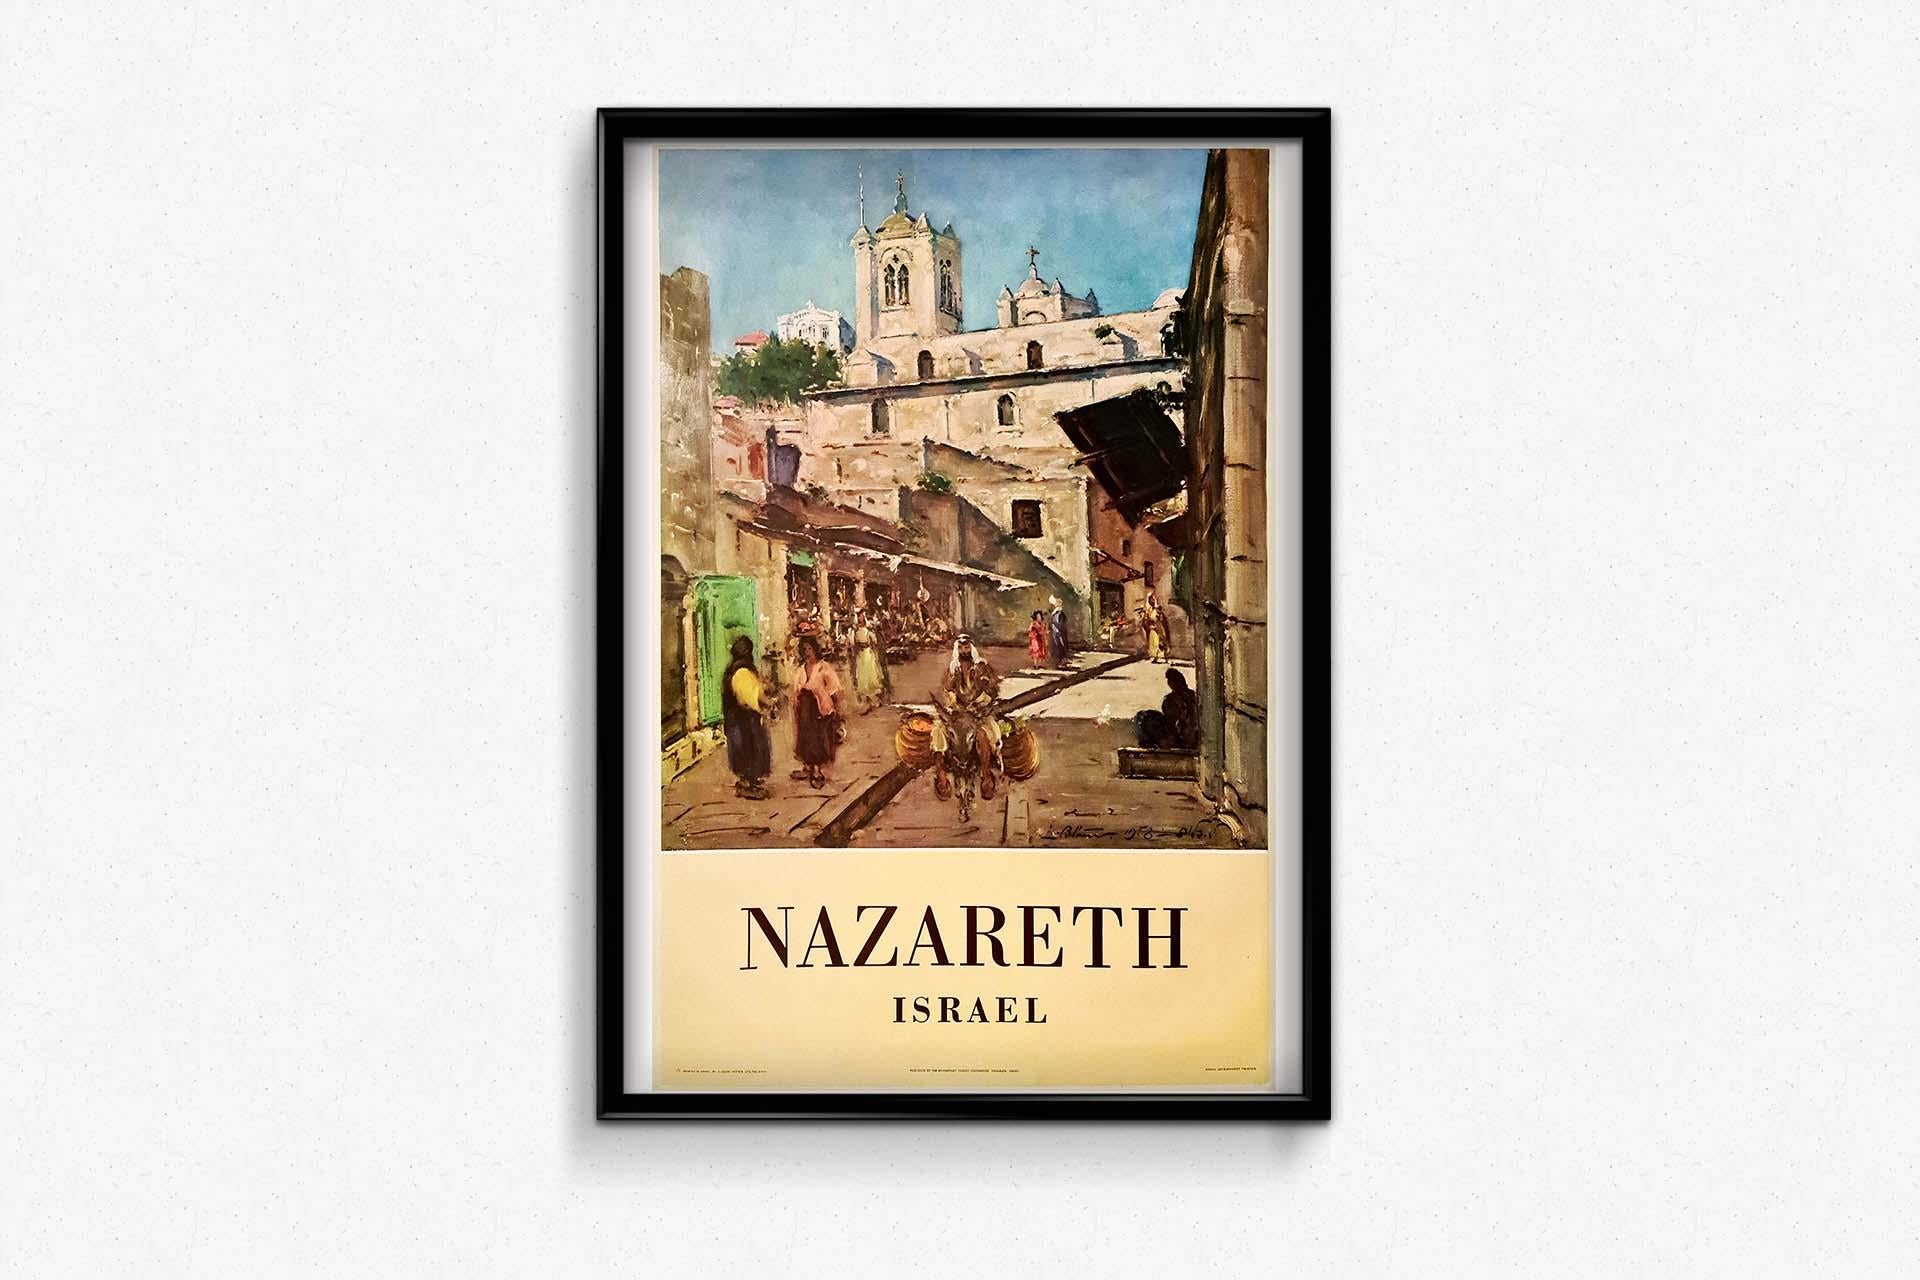 Beautiful tourist poster of Ludwig Blum for the city of Nazareth in Israel. Ludwig Blum (1891-1975) was an Israeli painter born in Moravia. He emigrated to Israel in 1923, as part of the third aliyah, and became known as 